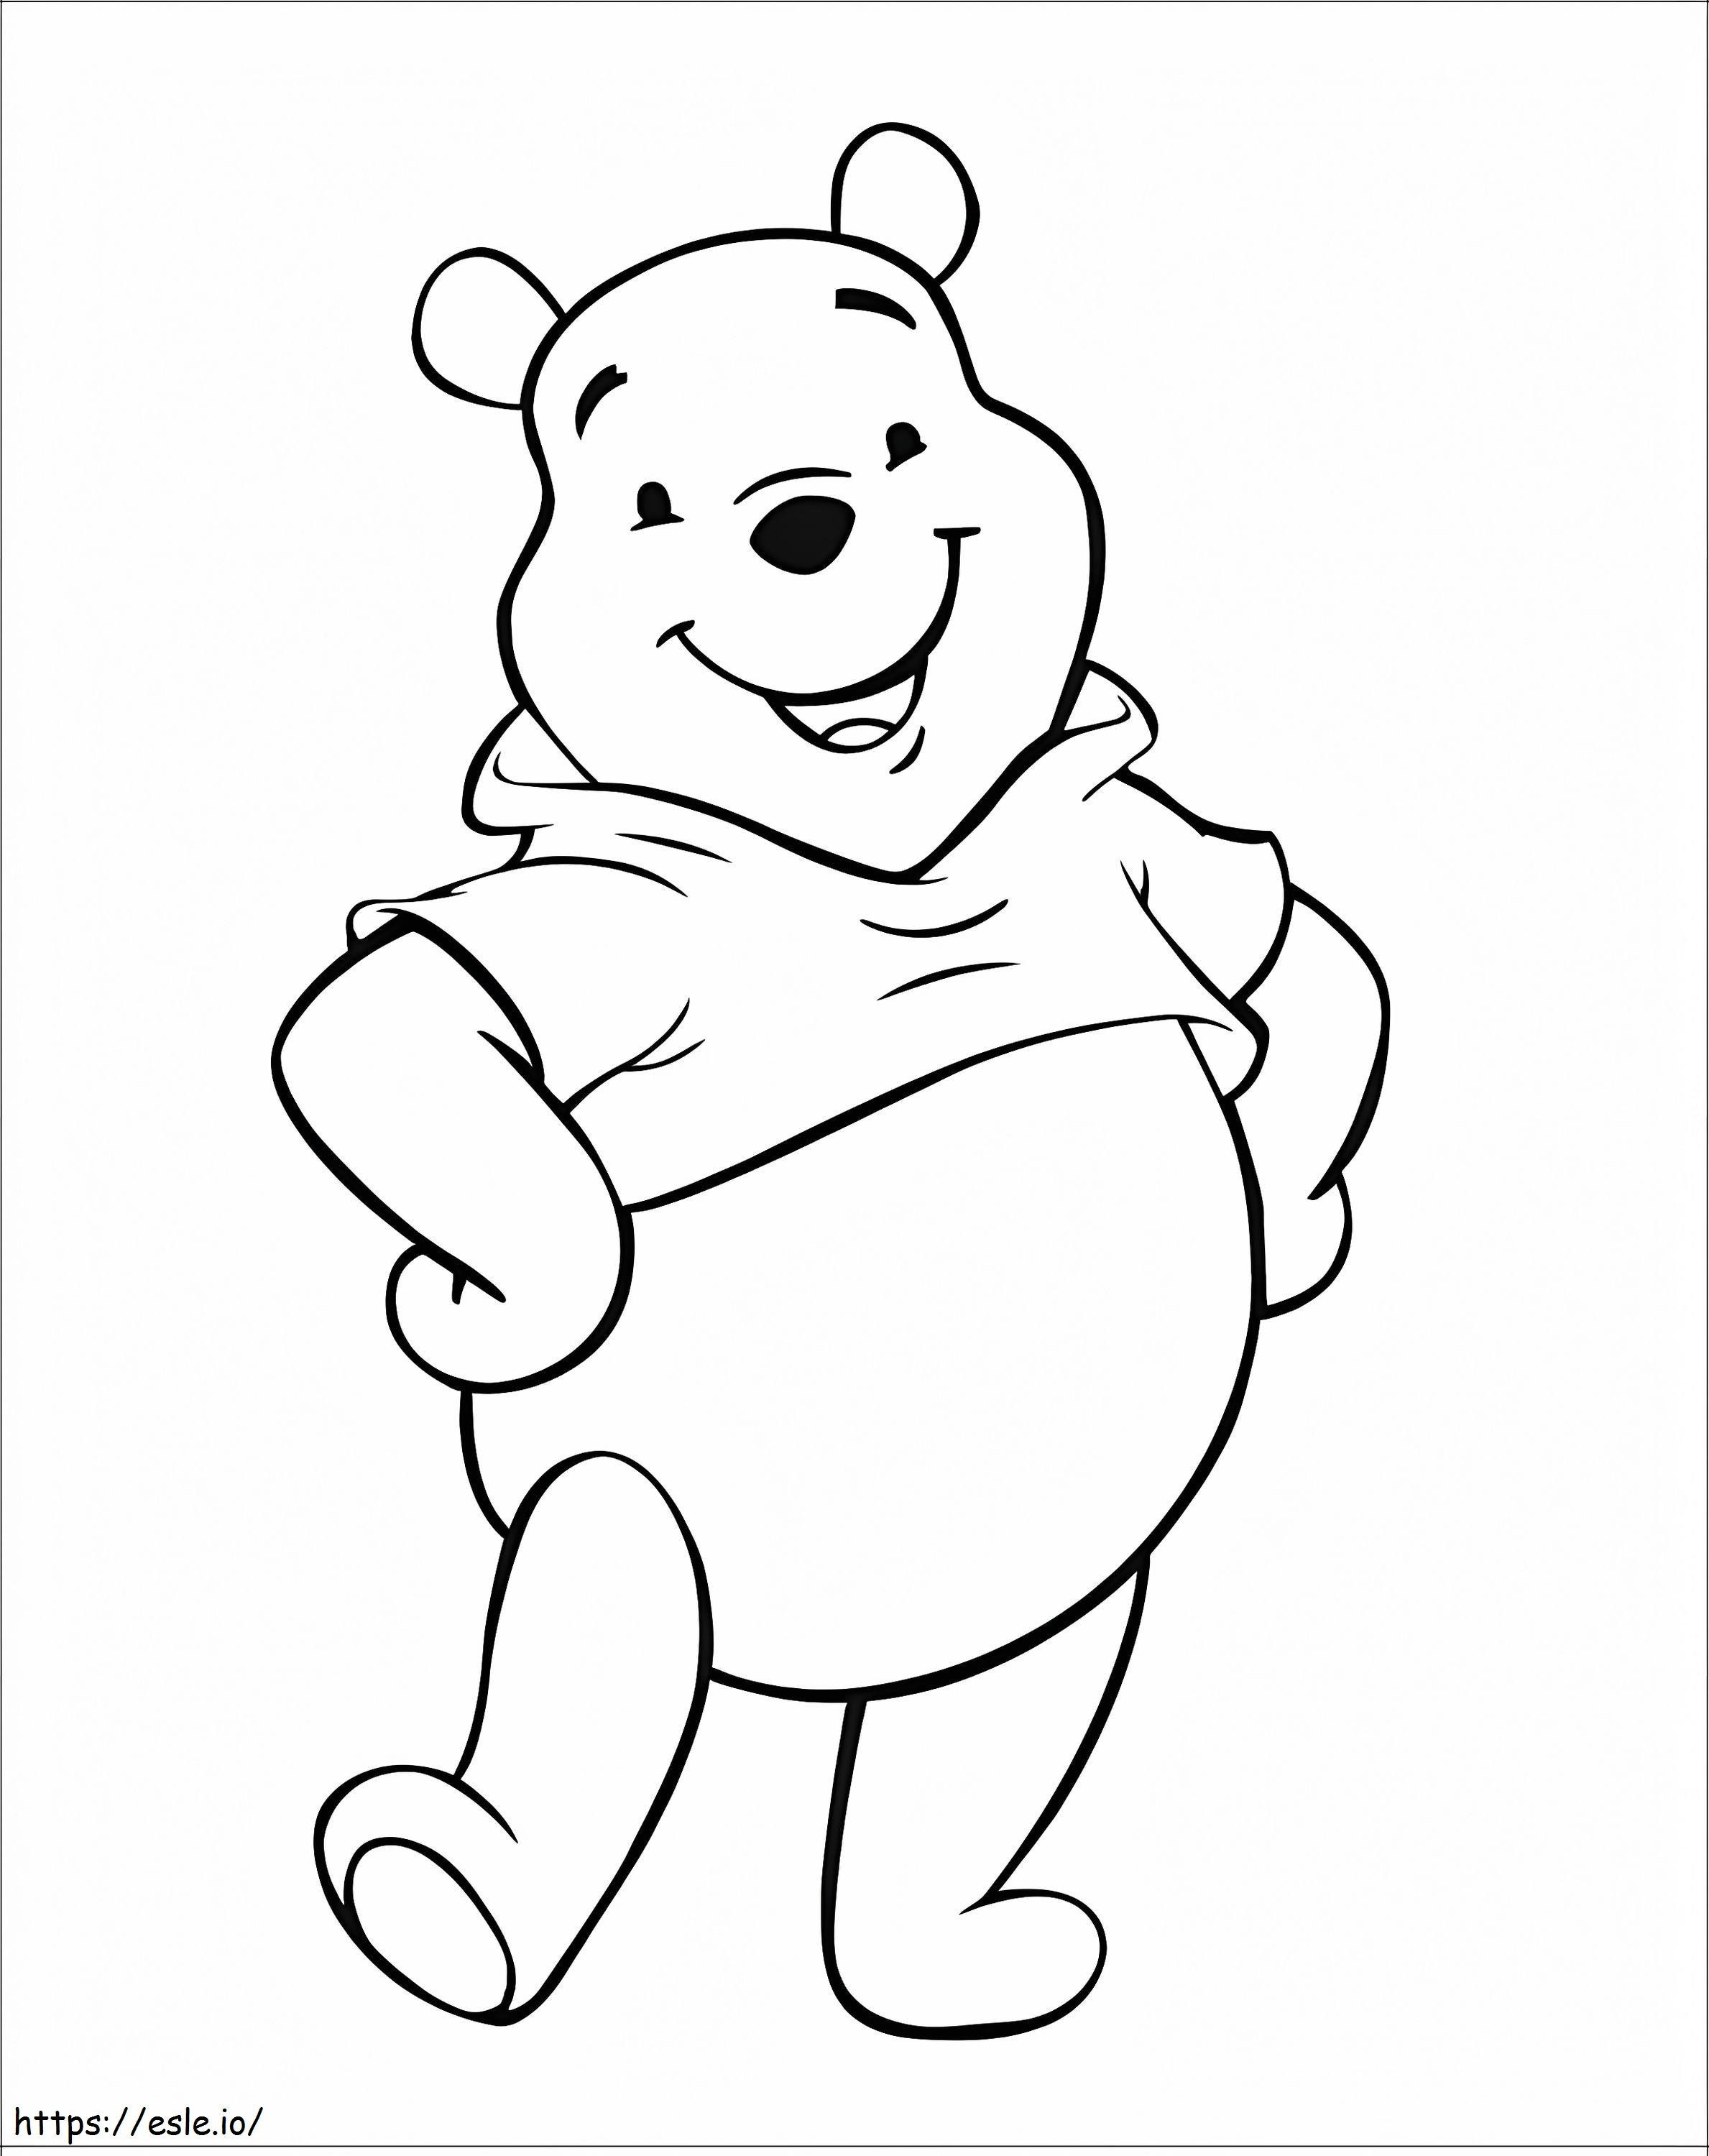 Basic Winnie Of The Pooh coloring page